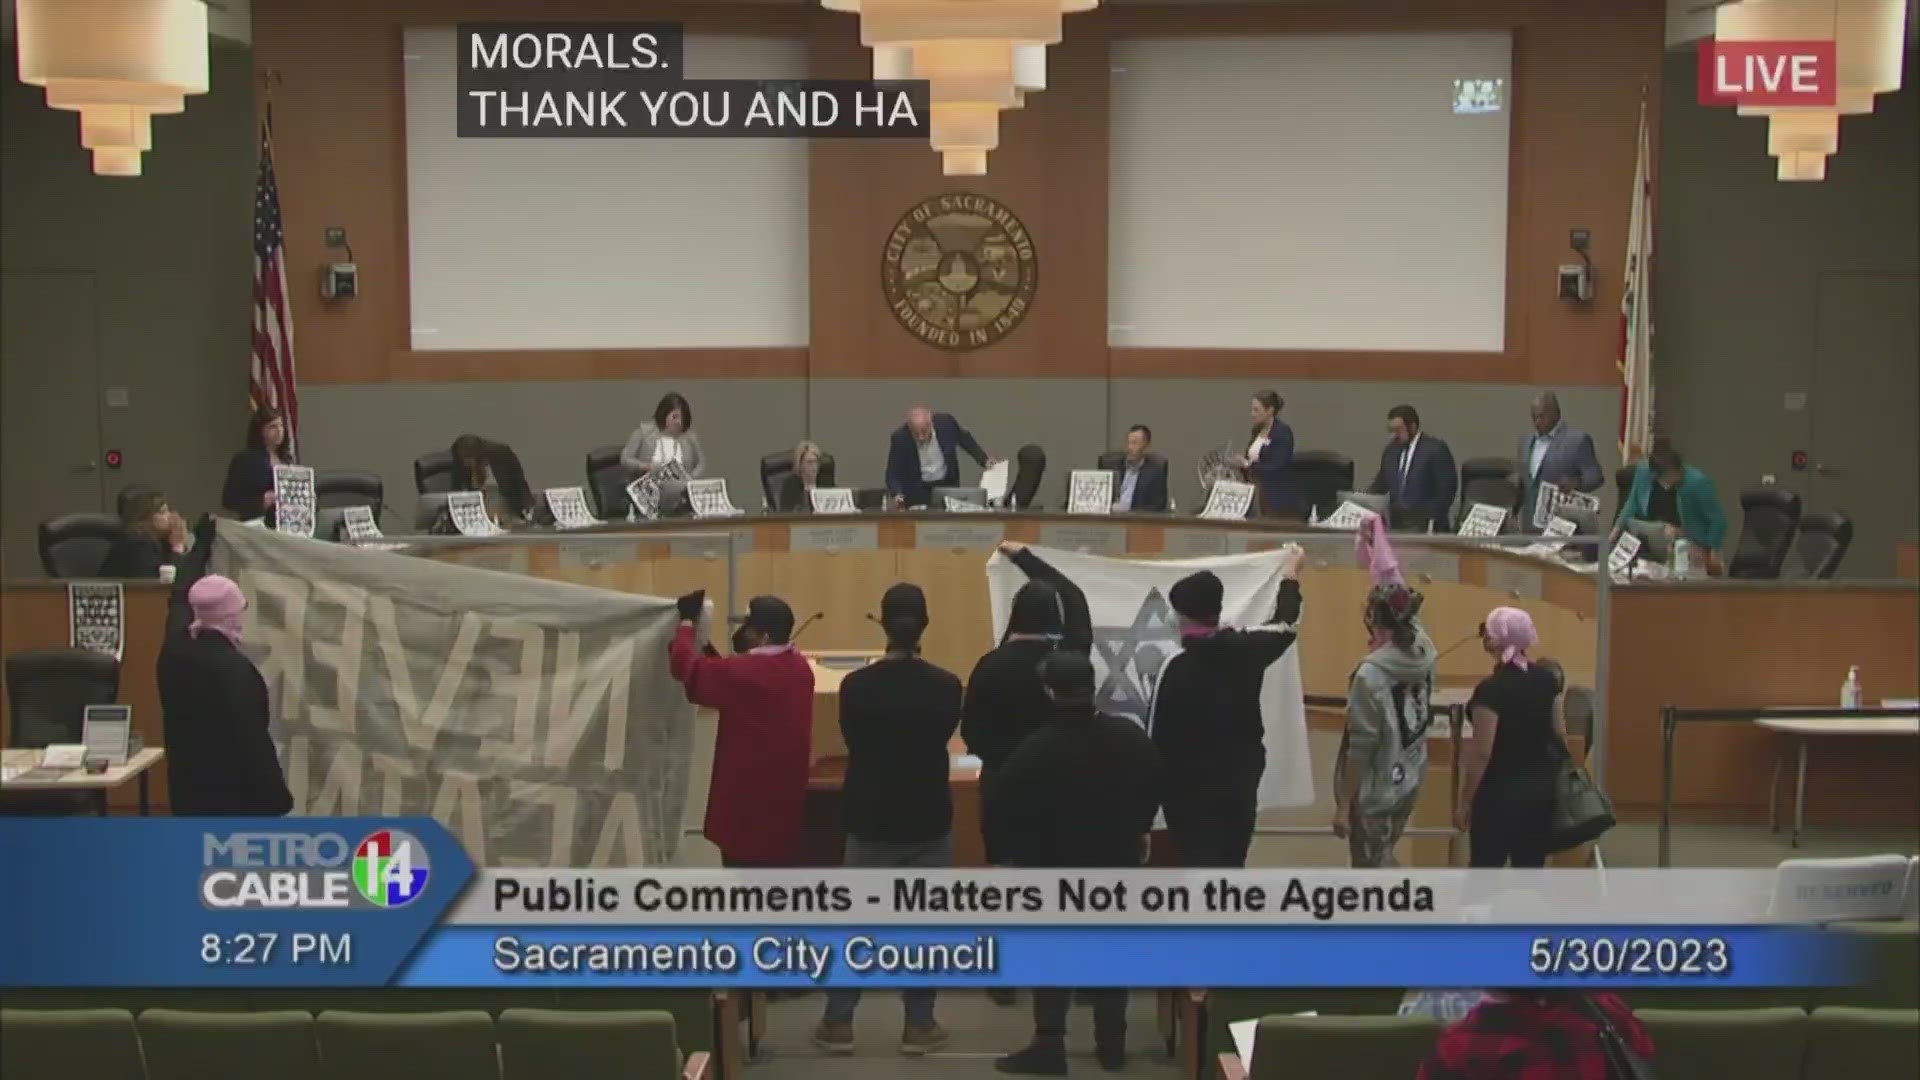 This comes after the last Sacramento City Council meeting was briefly halted when protesters blocked the antisemitic speaker from reaching the podium.